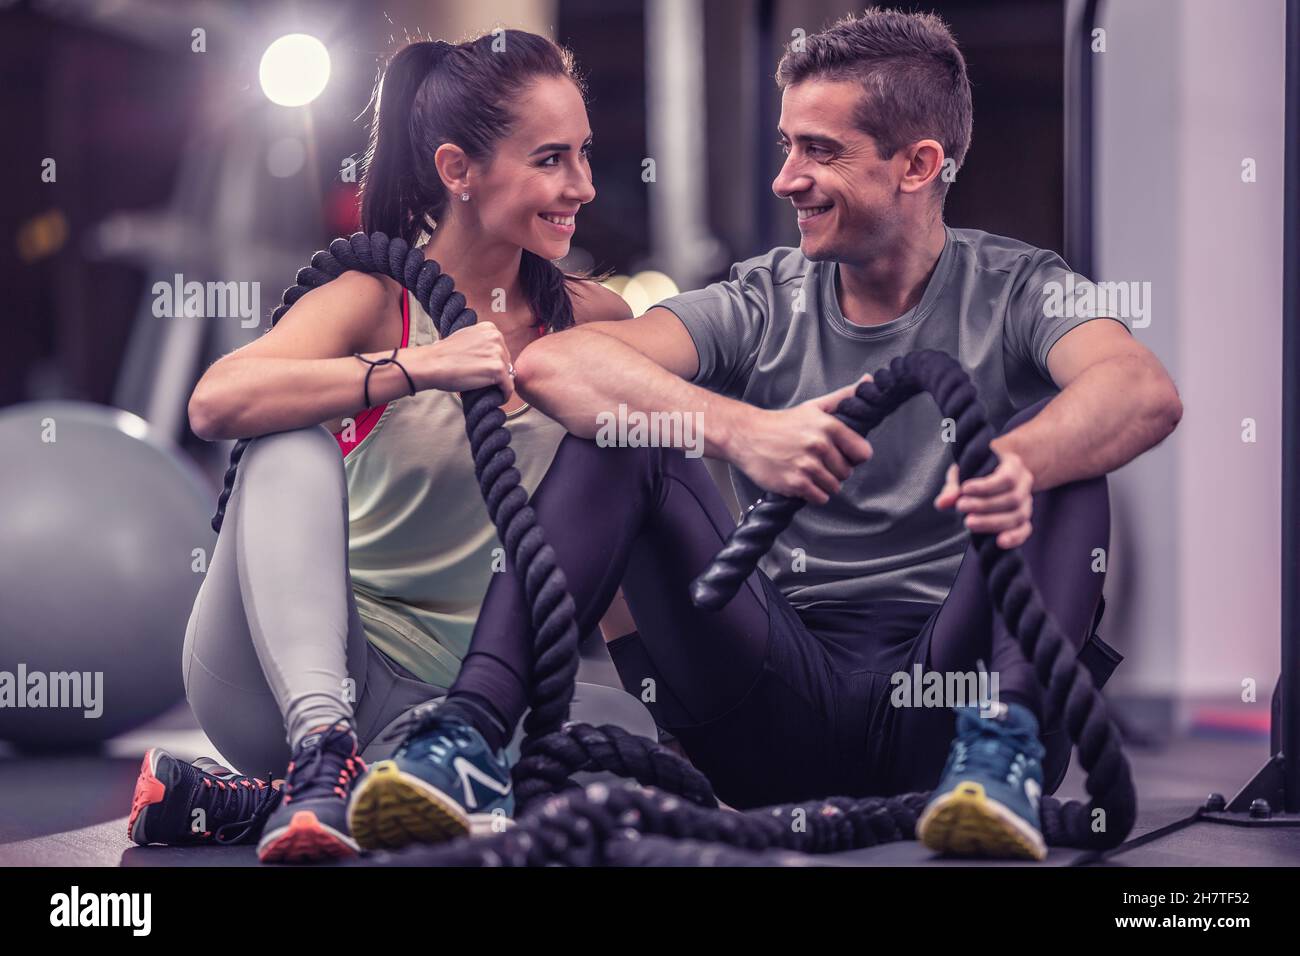 A couple that finished battle ropes workout sit together on a ground inside the gym, looking at each other, smiling. Stock Photo